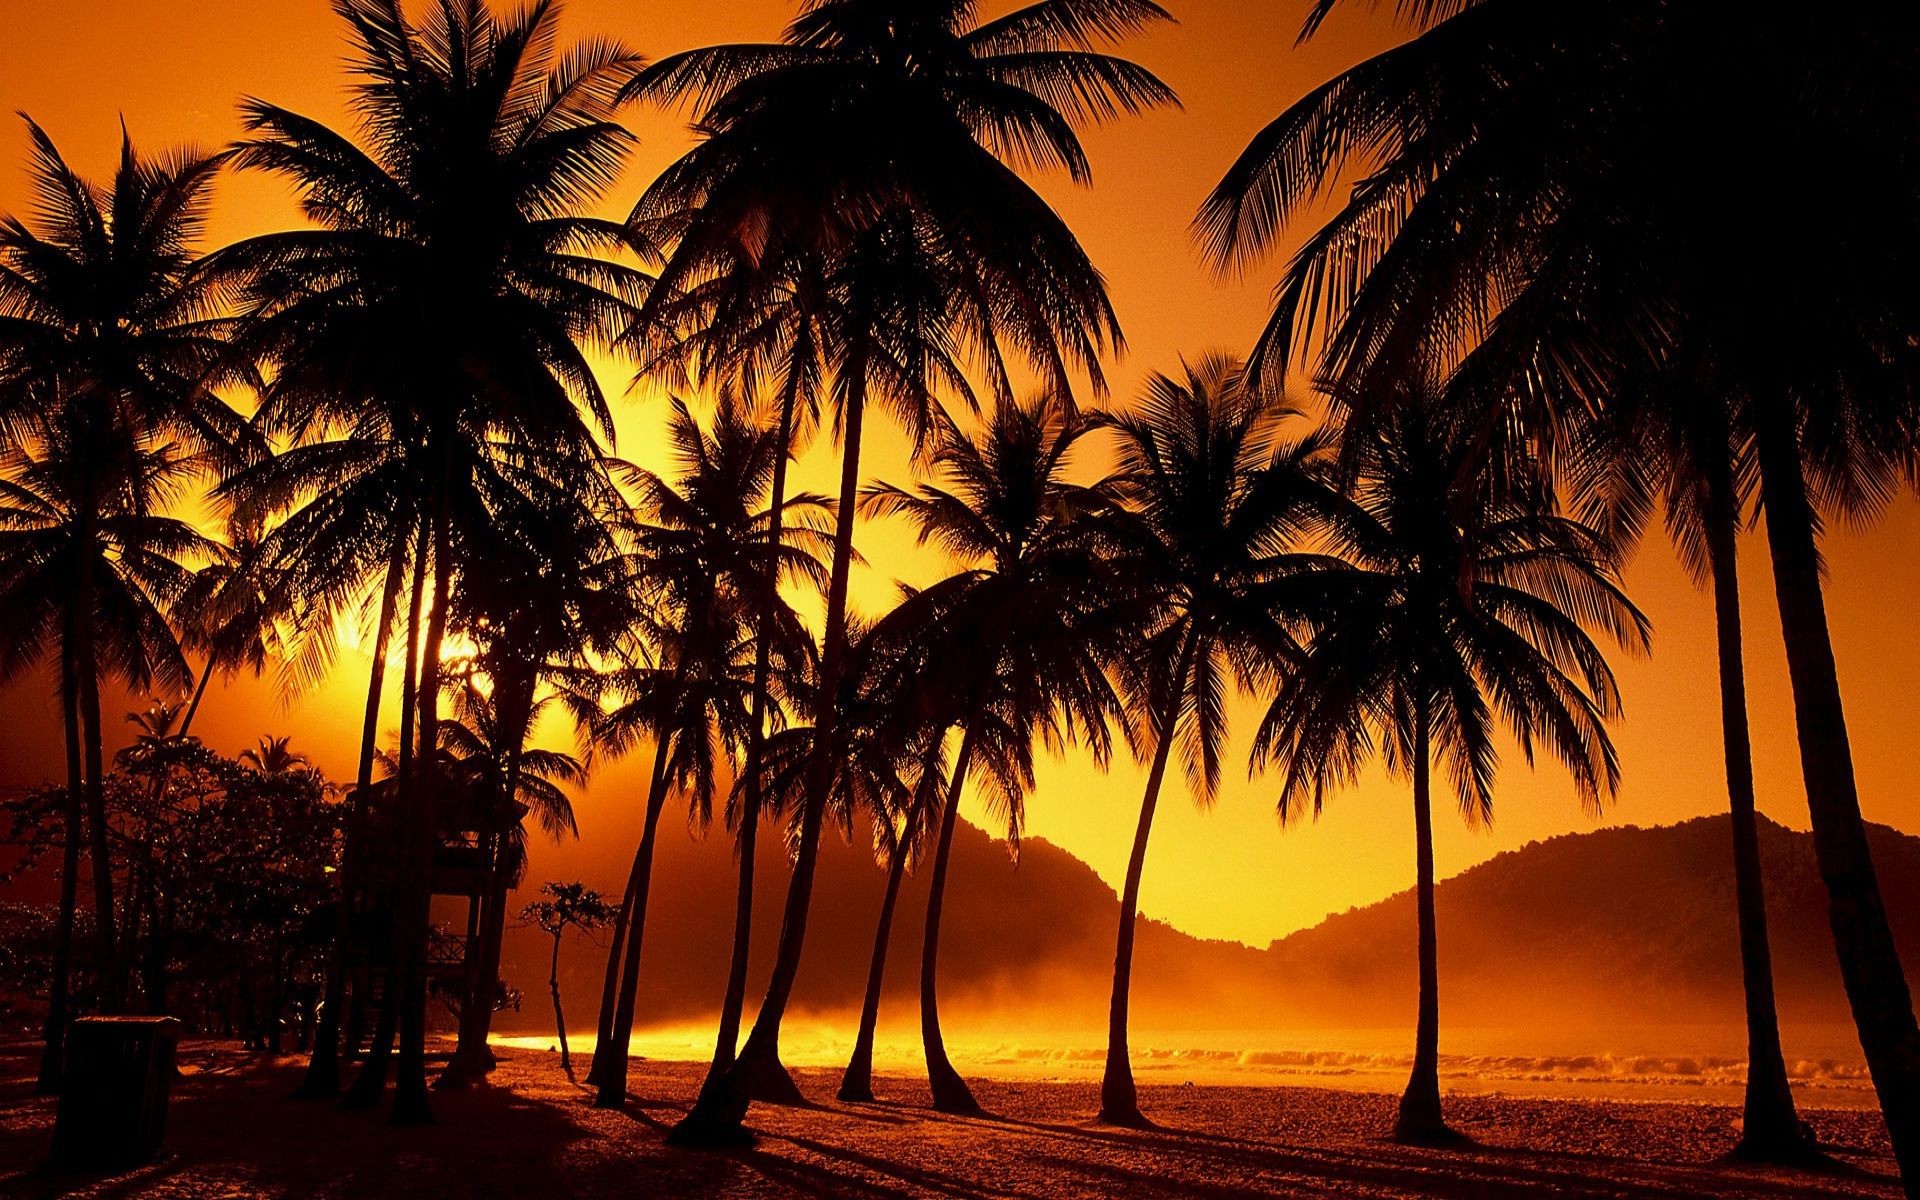 1920x1200 Sunset wall mural from scarface wall design sunset wall mural from  scarfacesunset palm trees wallpaper jnsrmgksb